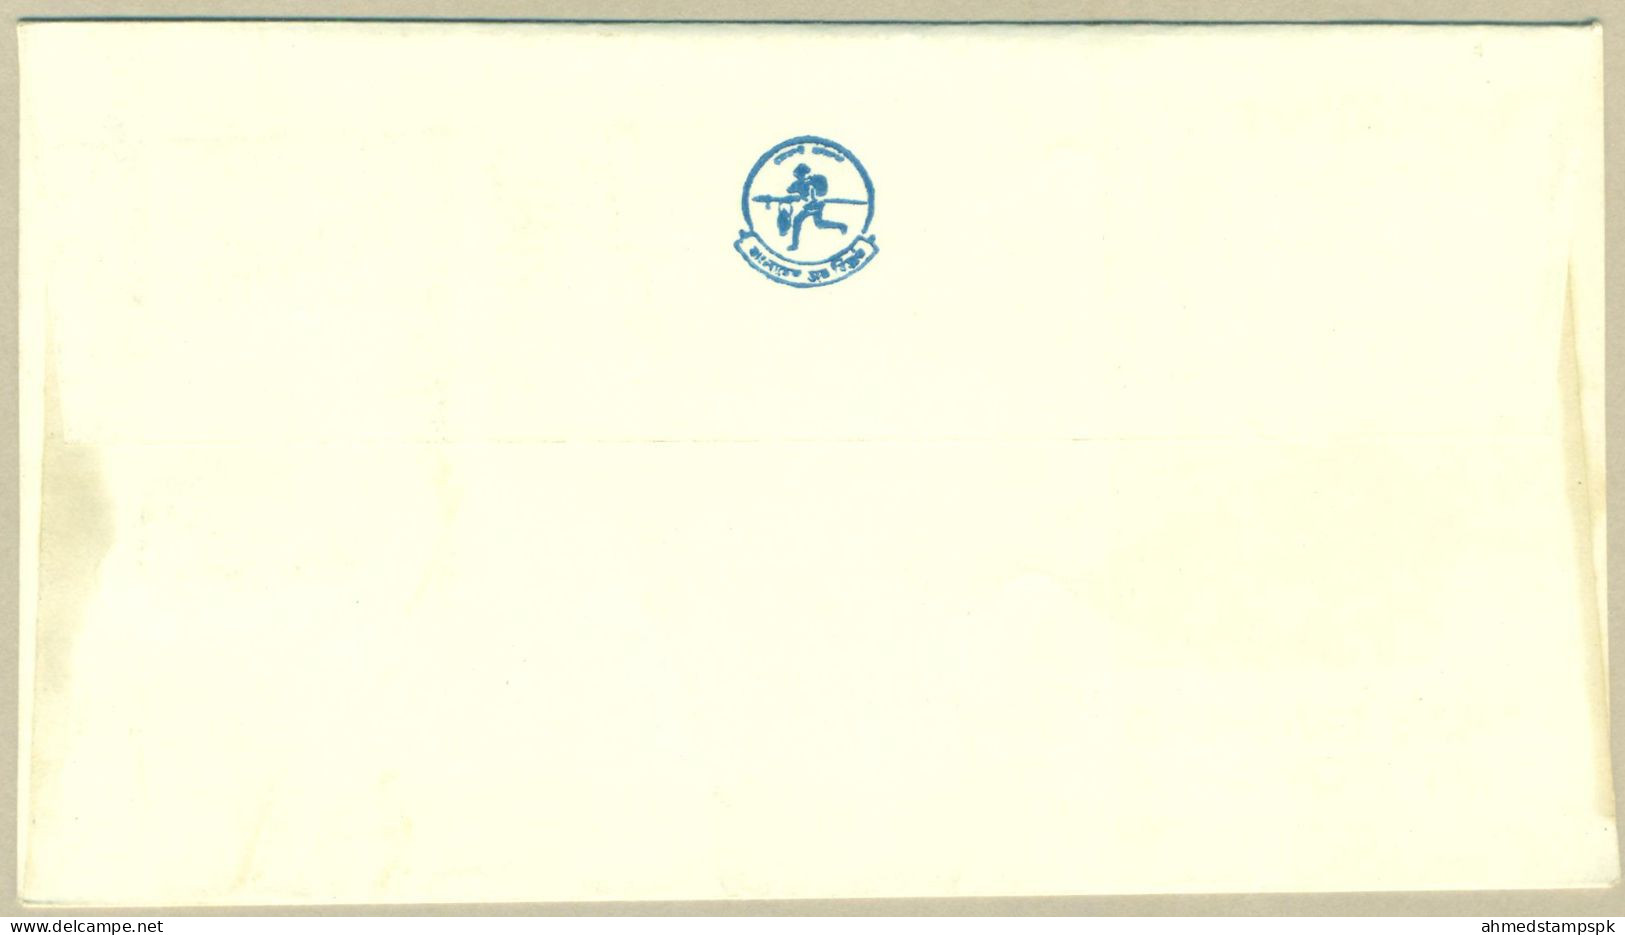 BANGLADESH 1979 MNH FDC 100th ANNERVERSARY OF SIR ROWLAND HILL'S DEATH  FIRST DAY COVER - Bangladesh